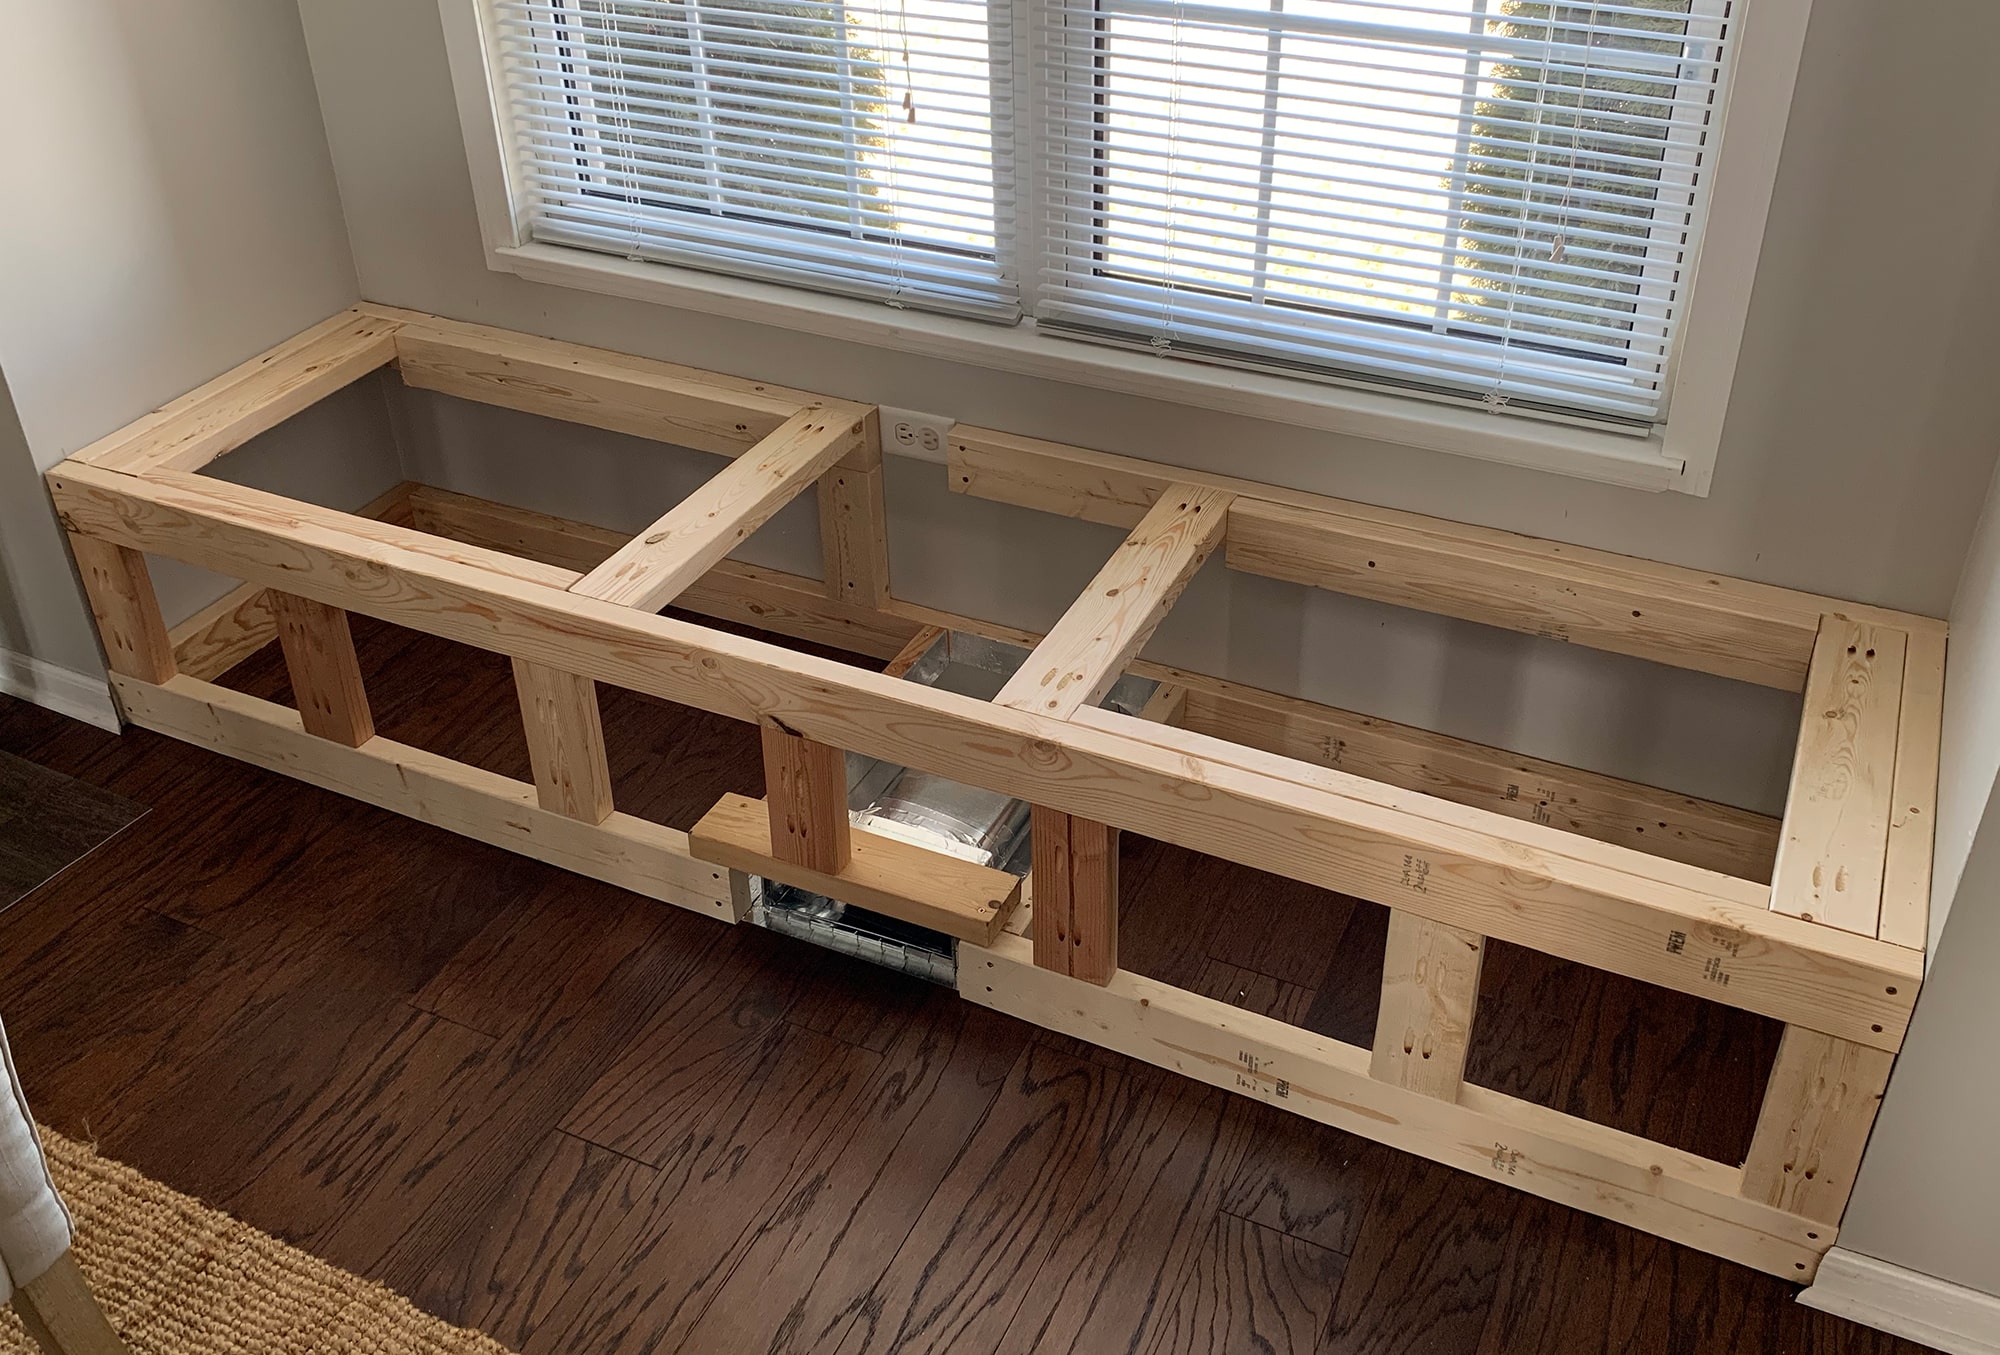 how to build a window seat with hidden storage | sammy on state